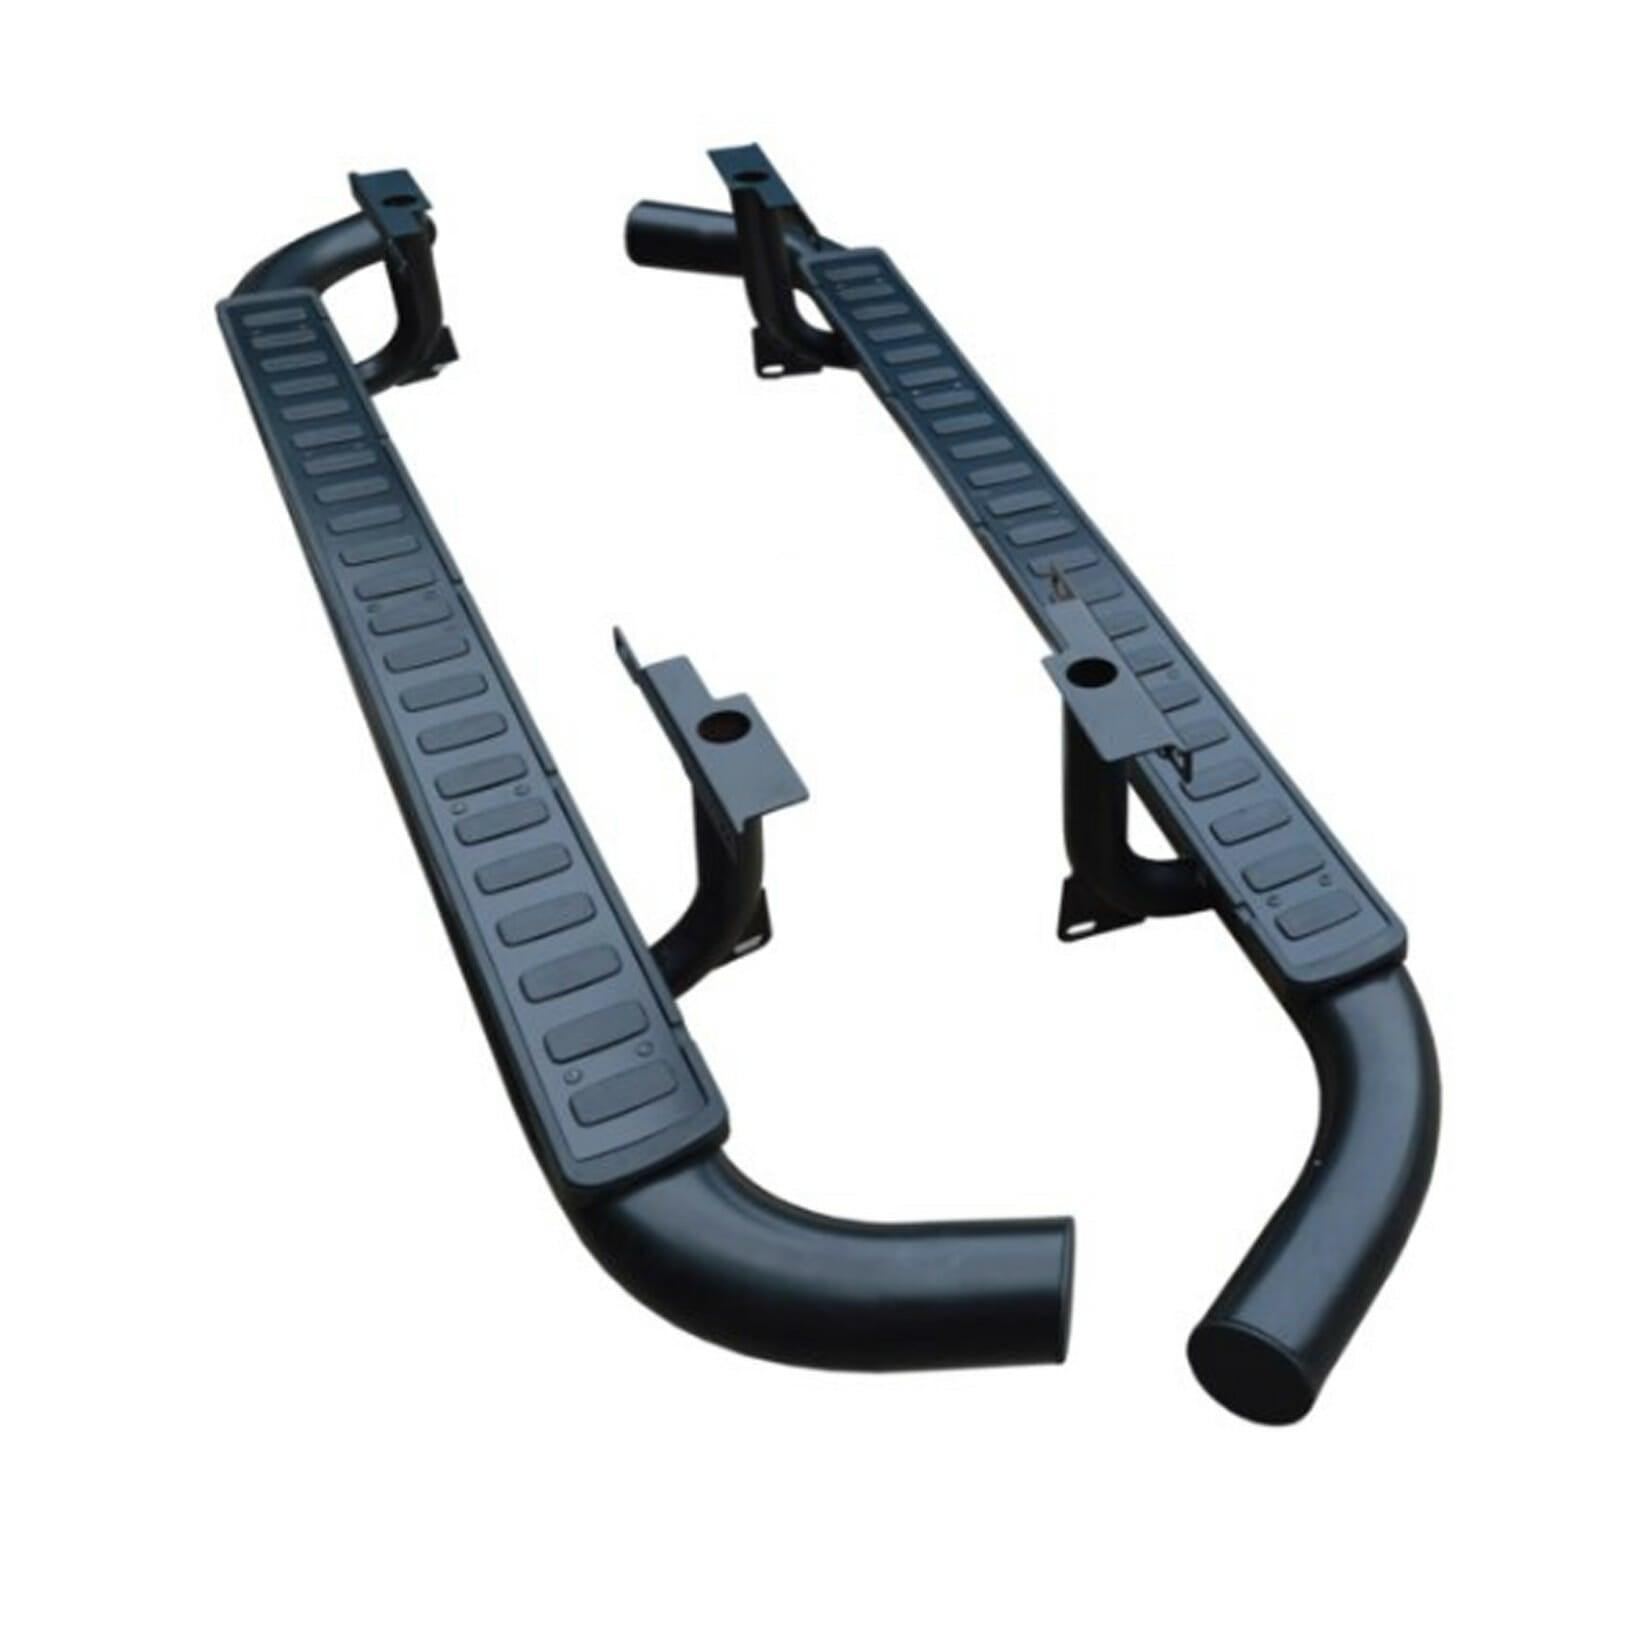 LAND ROVER DEFENDER 110 OEM STYLE RUNNING BOARDS SIDE STEPS PAIR BLACK - Storm Xccessories2